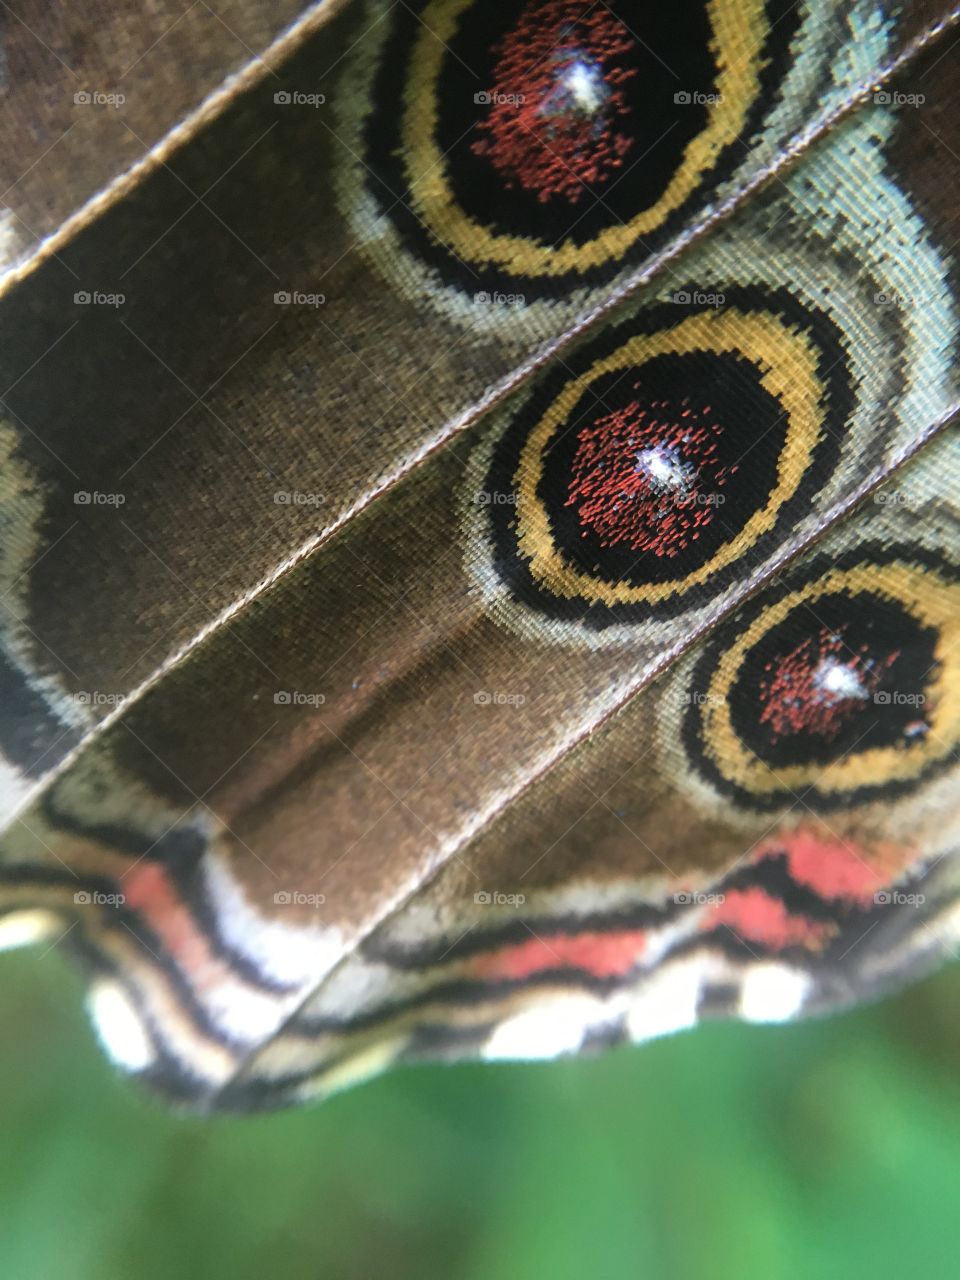 Butterfly scales